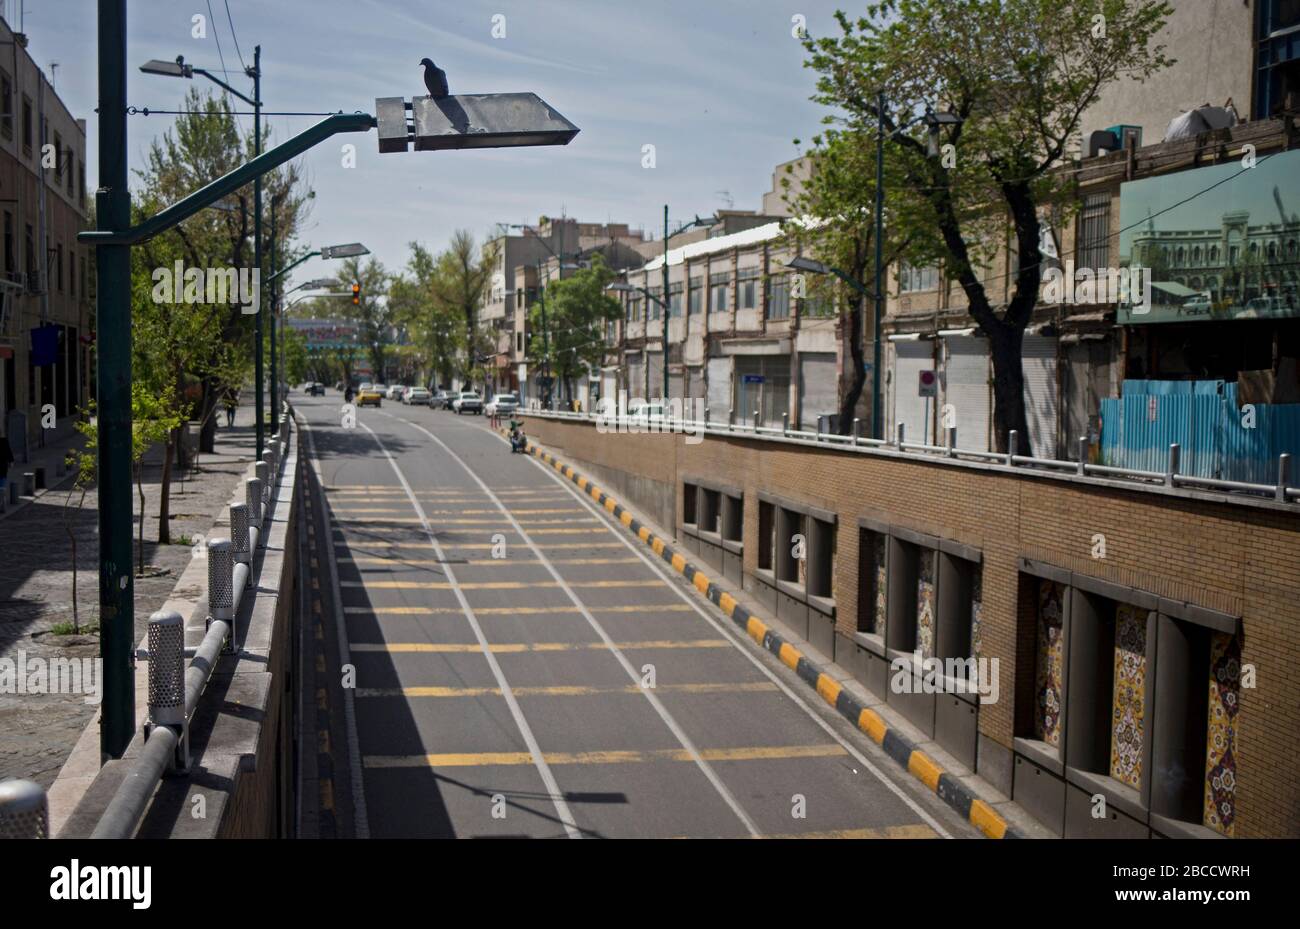 Iran. 3rd Apr, 2020. Photo taken on April 3, 2020 shows an empty street in Tehran, Iran. The number of confirmed cases of COVID-19 in Iran reached 55,743 on Saturday, with an increase of 2,560 in the past 24 hours, according to the latest figure from Iran Ministry of Health and Medical Education. Credit: Ahmad Halabisaz/Xinhua/Alamy Live News Stock Photo